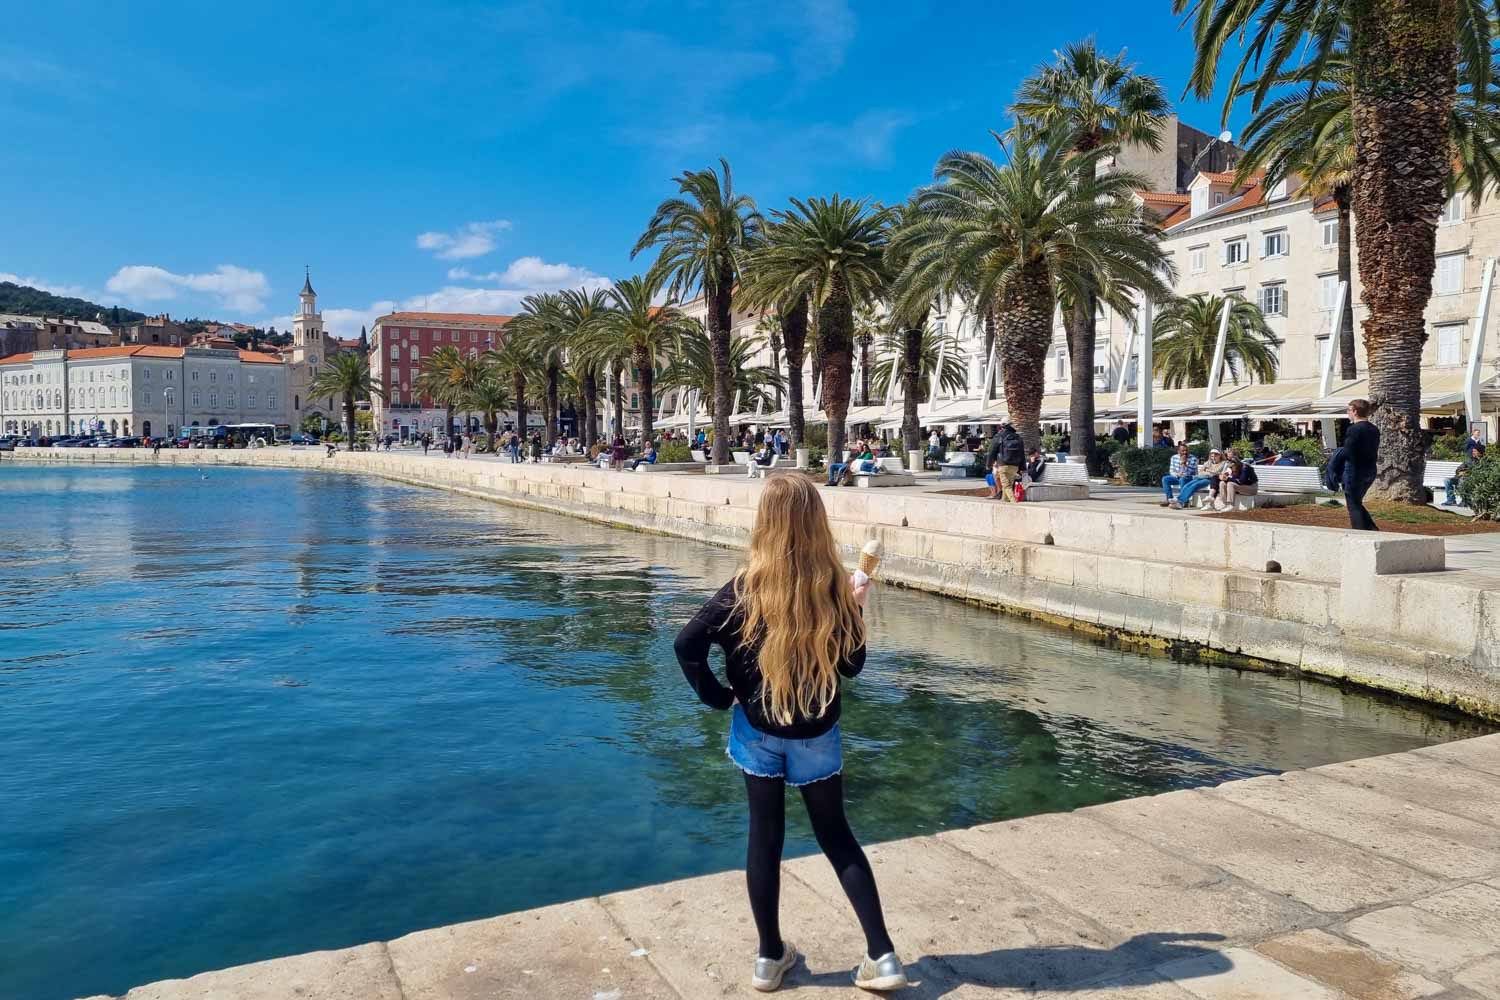 My daughter holding an ice cream looking along the Riva waterfront promenade lined with palm trees to some of the old buildings of Split - my pick of the best things to do in Split with kids